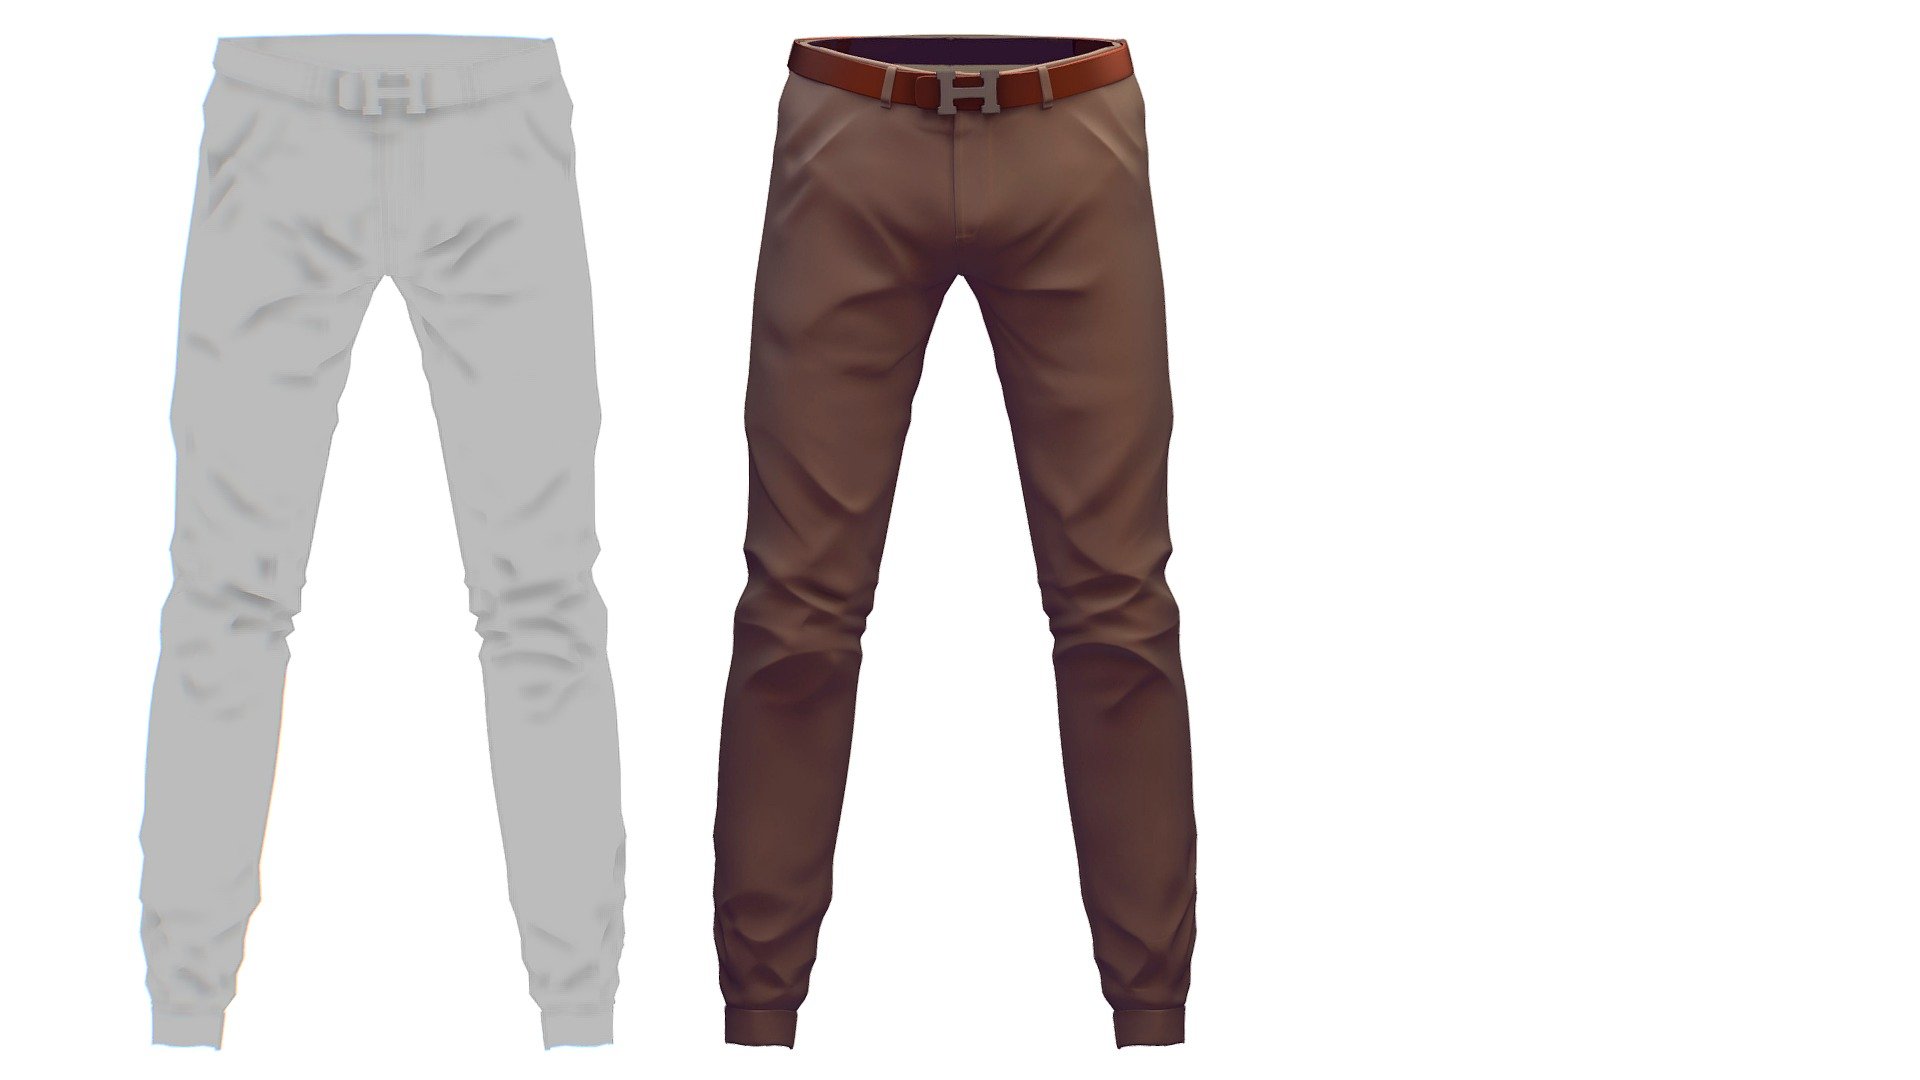 Cartoon High Poly Subdivision Brown Pants with Belt

No HDRI map, No Light, No material settings - only Diffuse/Color Map Texture (2500x2500) 

More information about the 3D model: please use the Sketchfab Model Inspector - Key (i) - Cartoon High Poly Subdivision Brown Pants  Belt - Buy Royalty Free 3D model by Oleg Shuldiakov (@olegshuldiakov) 3d model